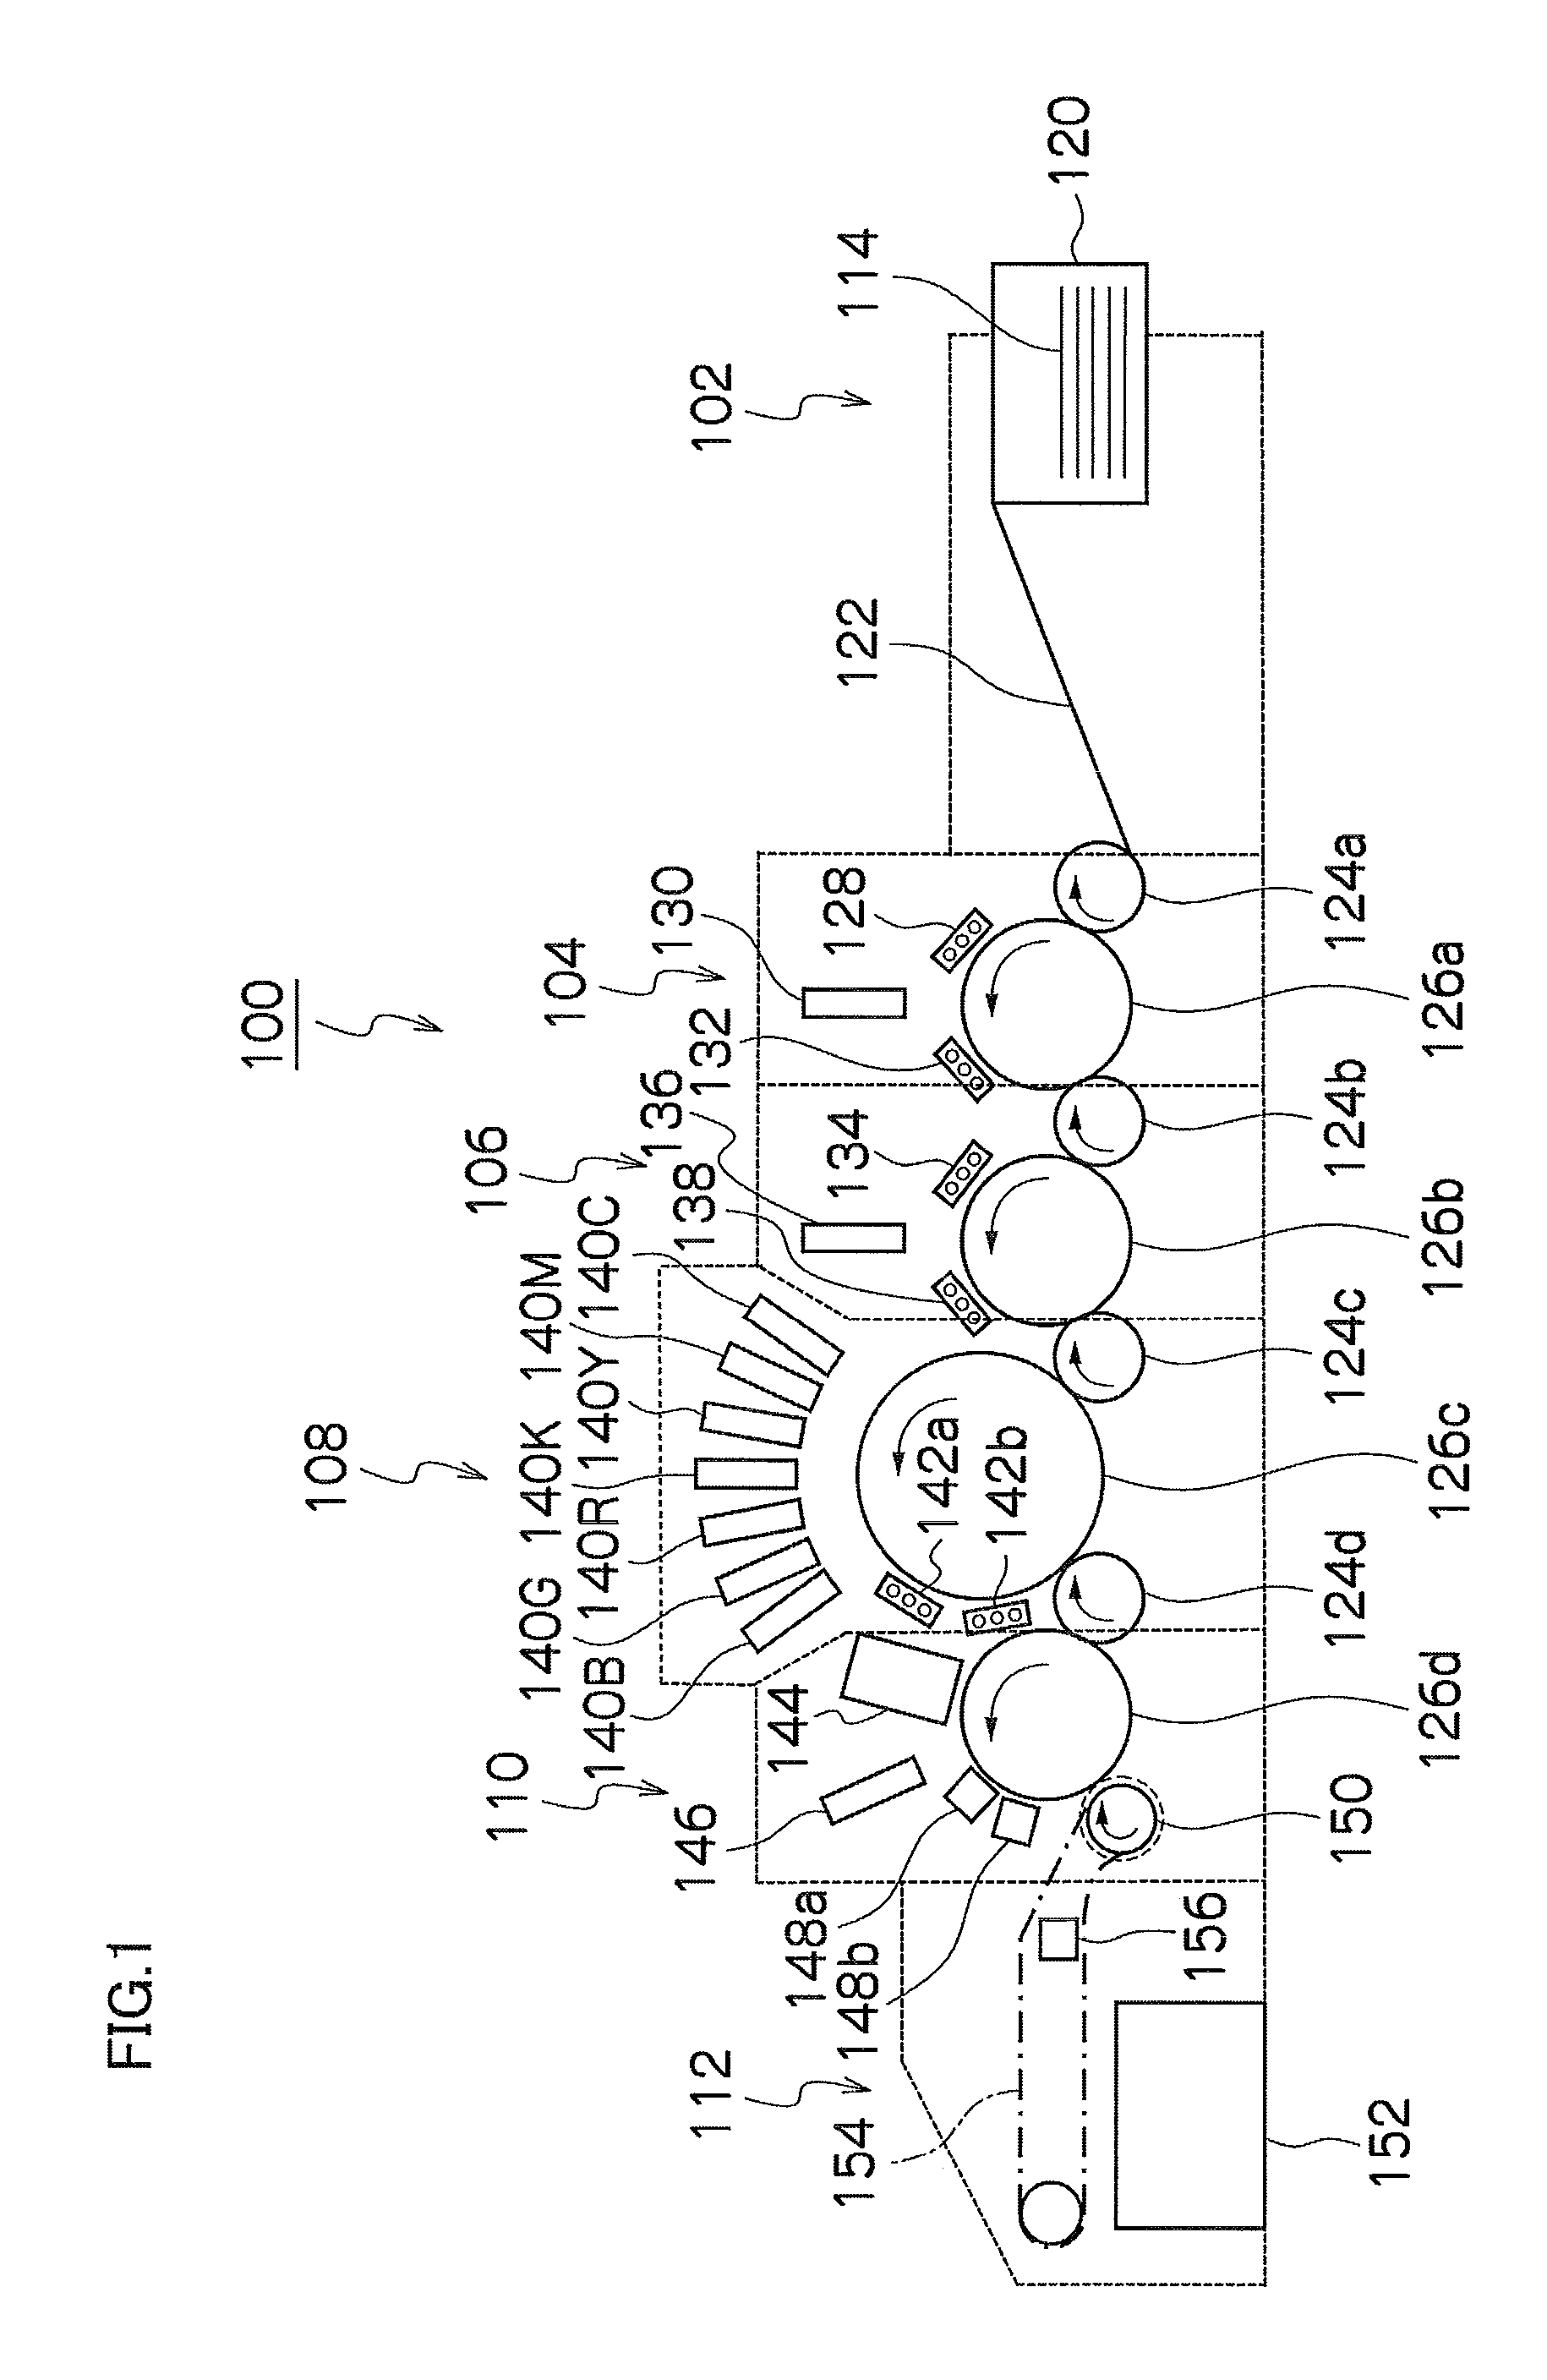 Image forming apparatus and maintenance method